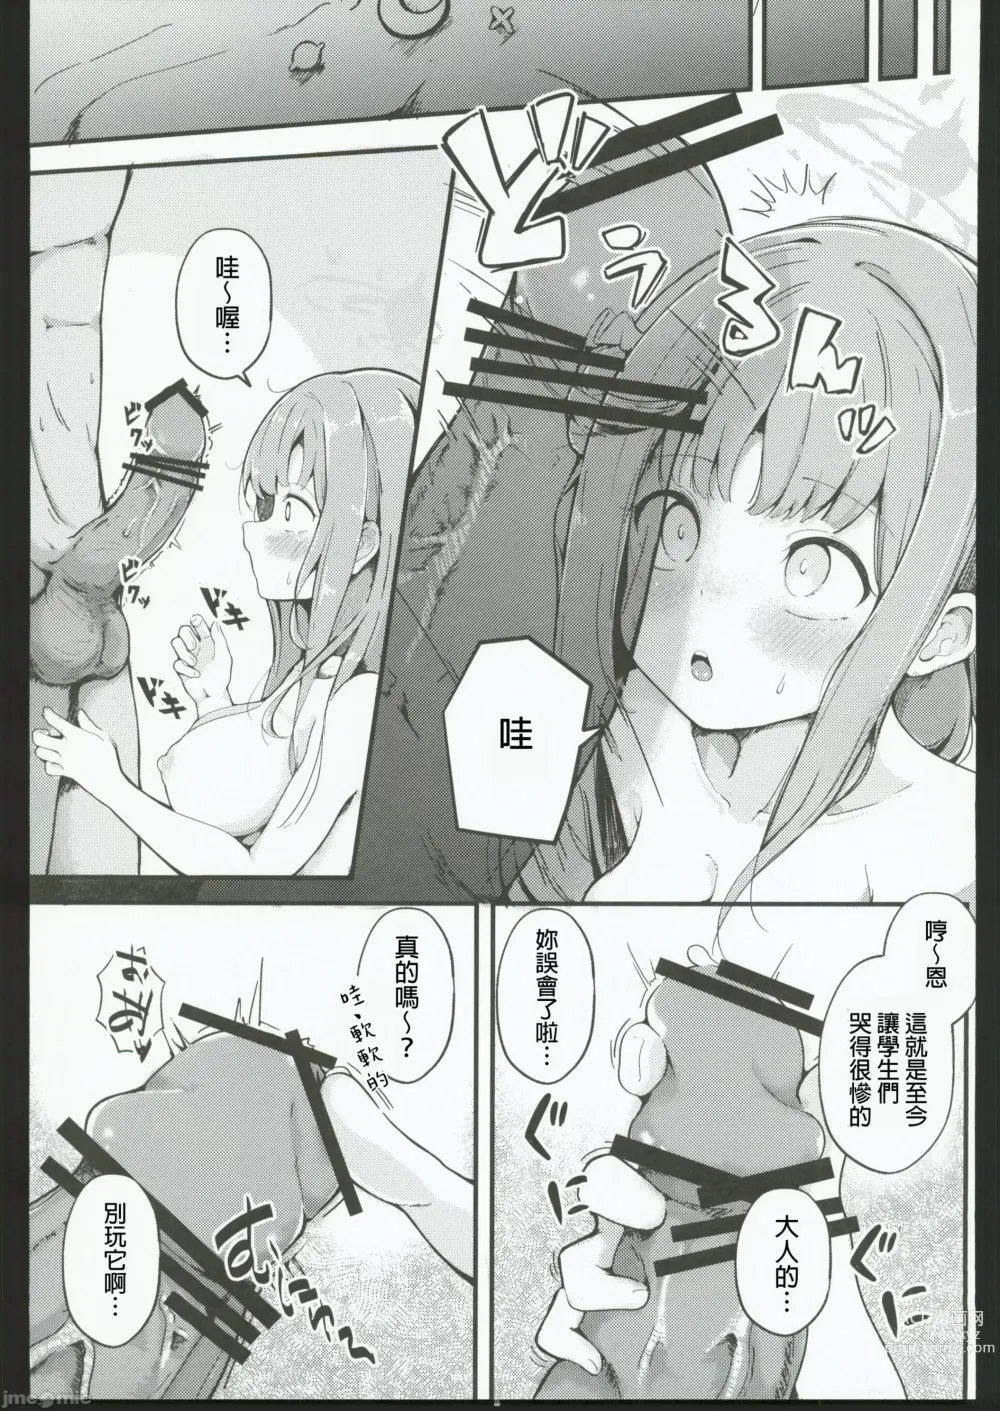 Page 16 of doujinshi Blanc Aile to Otogibanashi - The treaty lost, but hope remains.